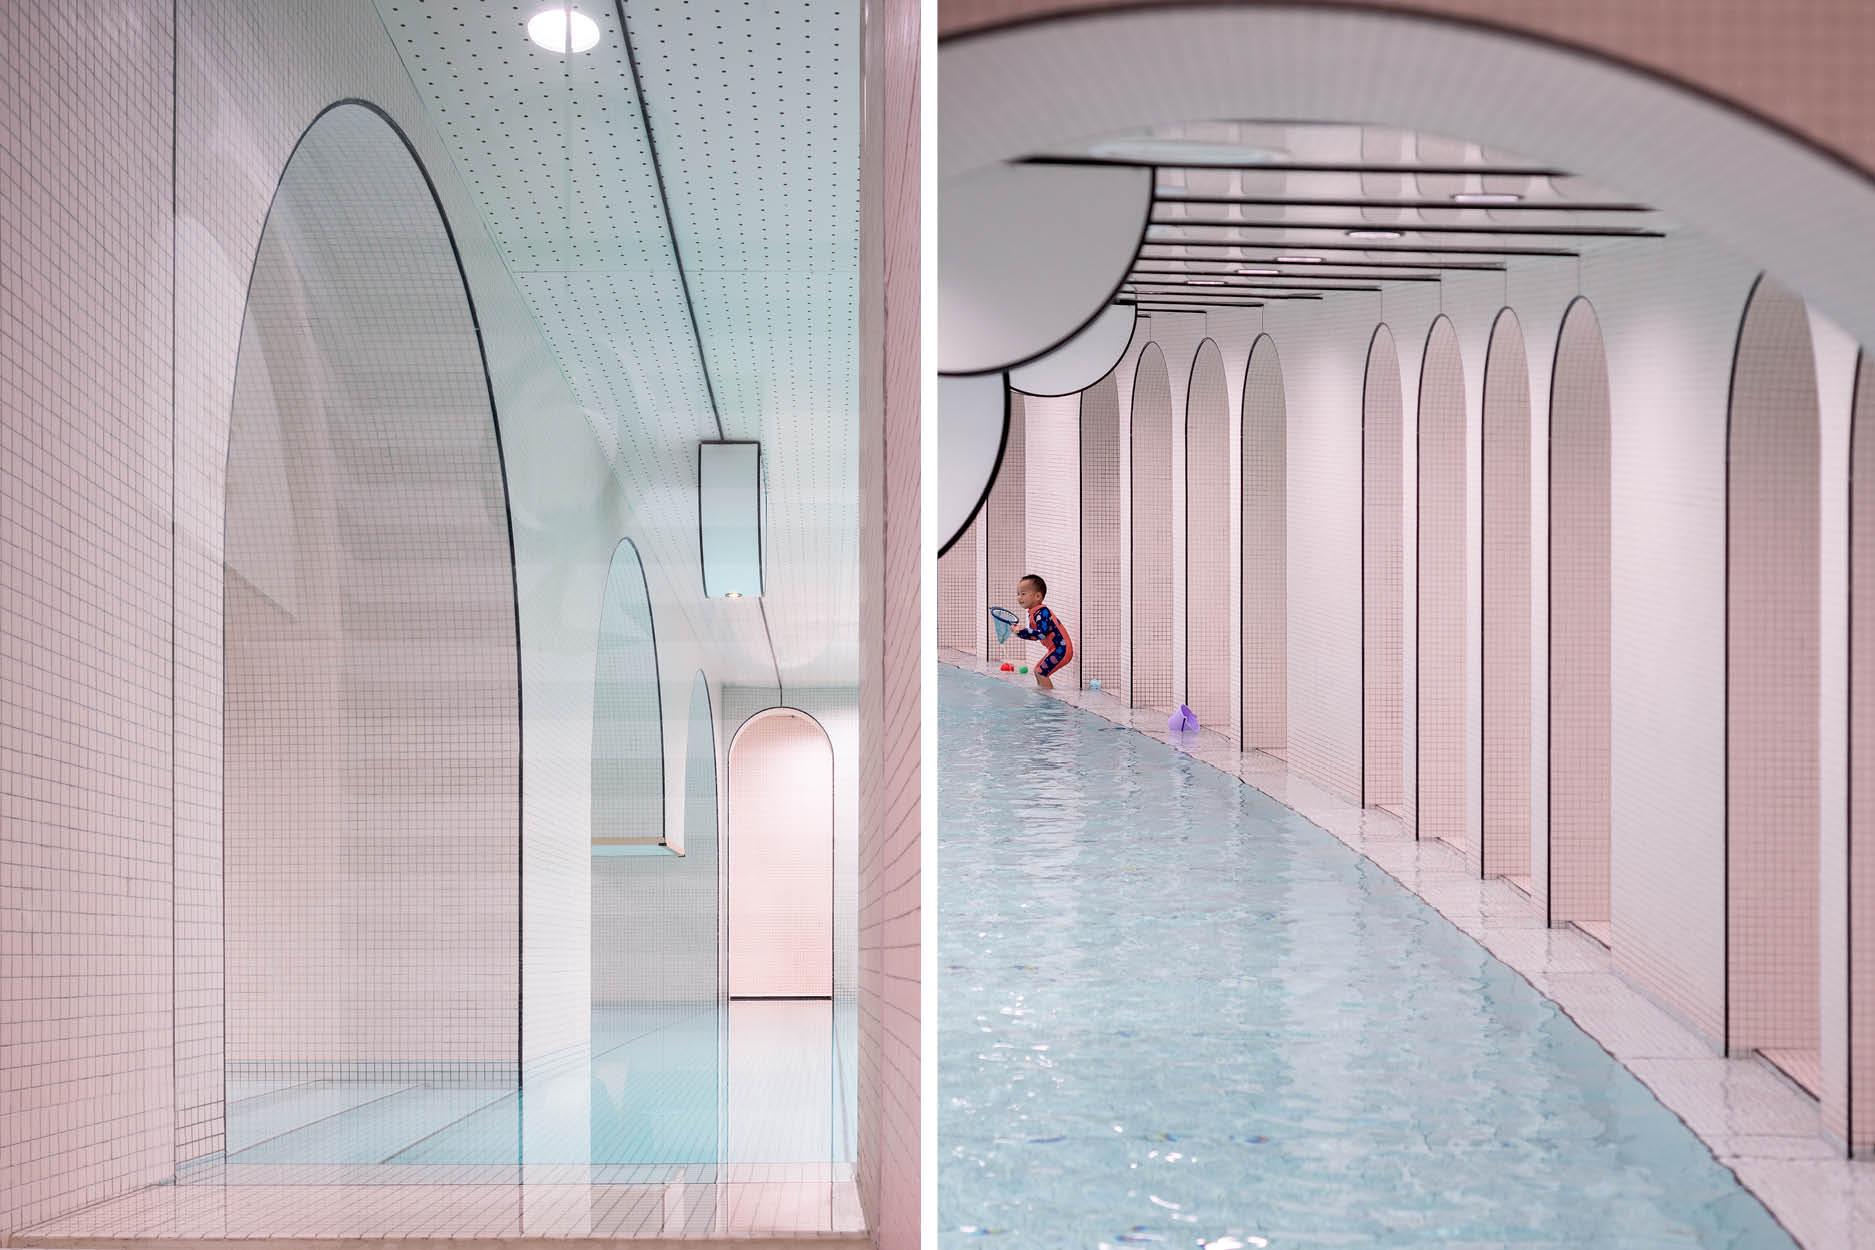 This Could Be The Most Beautiful Swimming Pool You've Seen